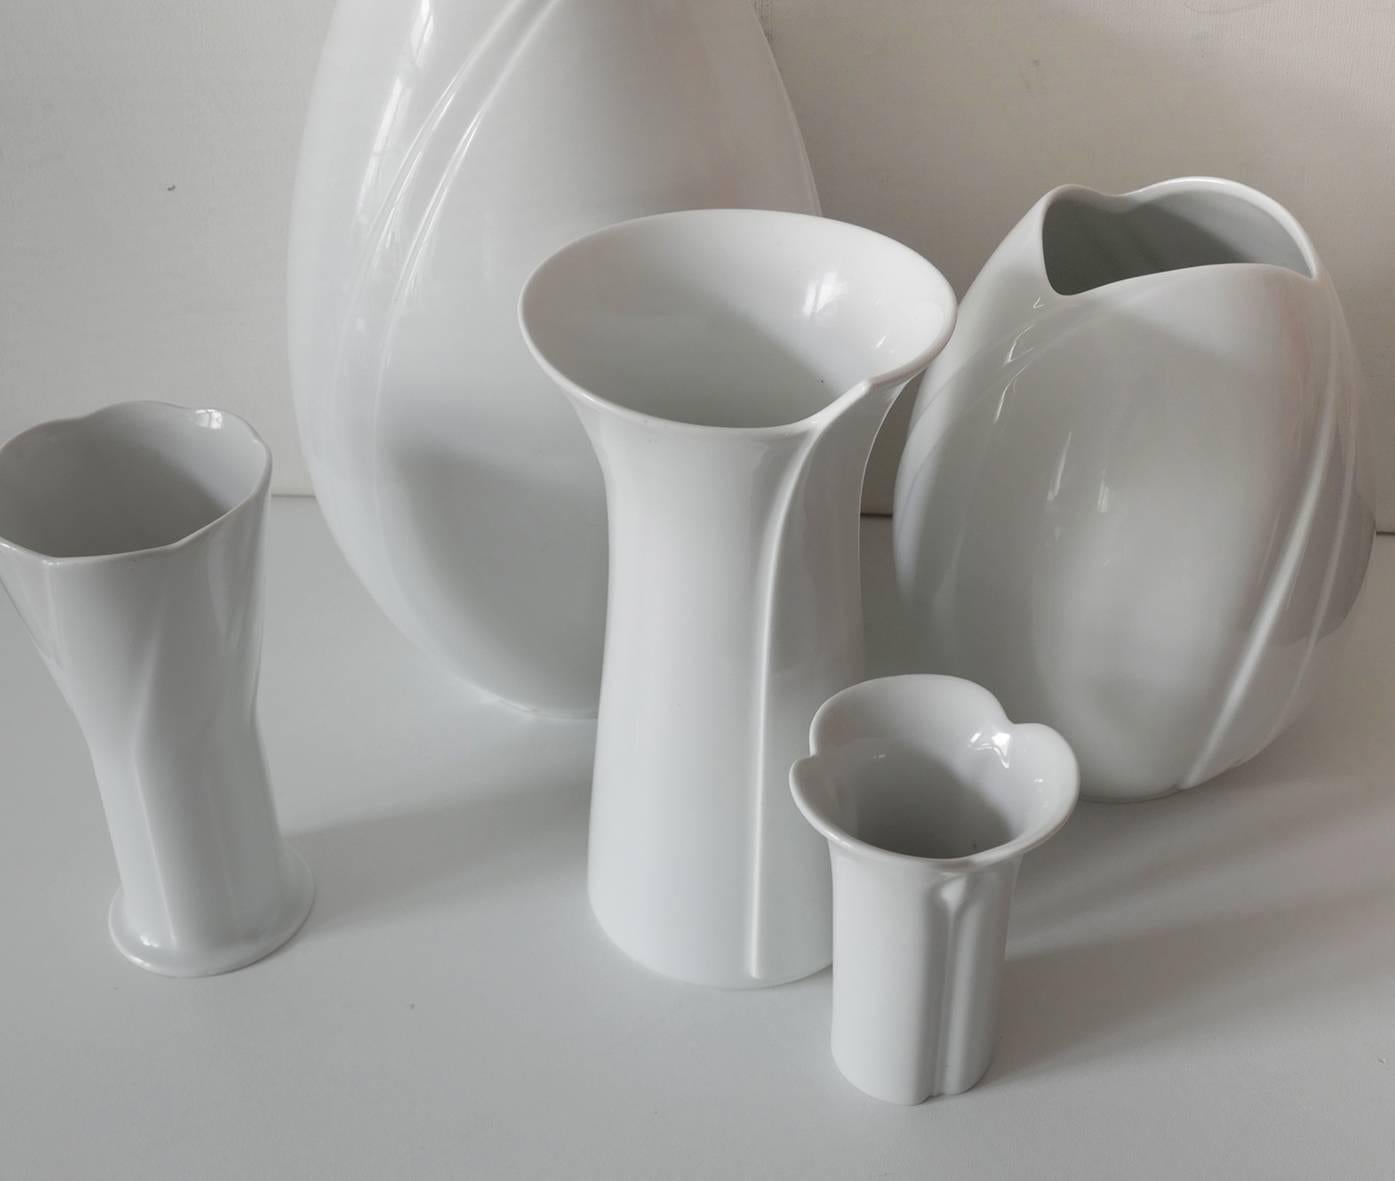 Beautiful set of five white porcelain vases by Arzberg Bavaria, Germany, 1960s.
Measure: 1. Height 7.3